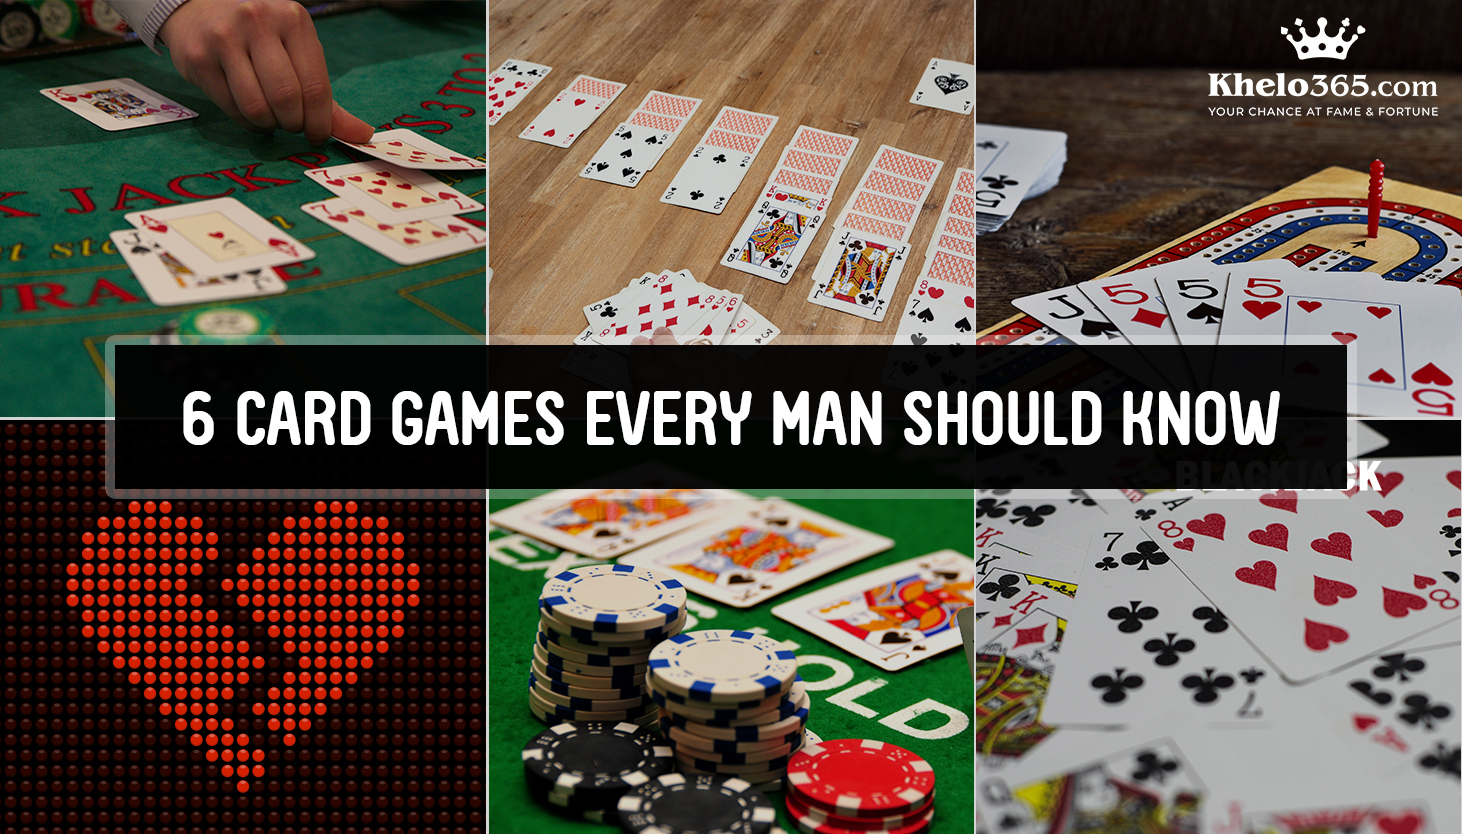 6 Card Games Every Man Should Know